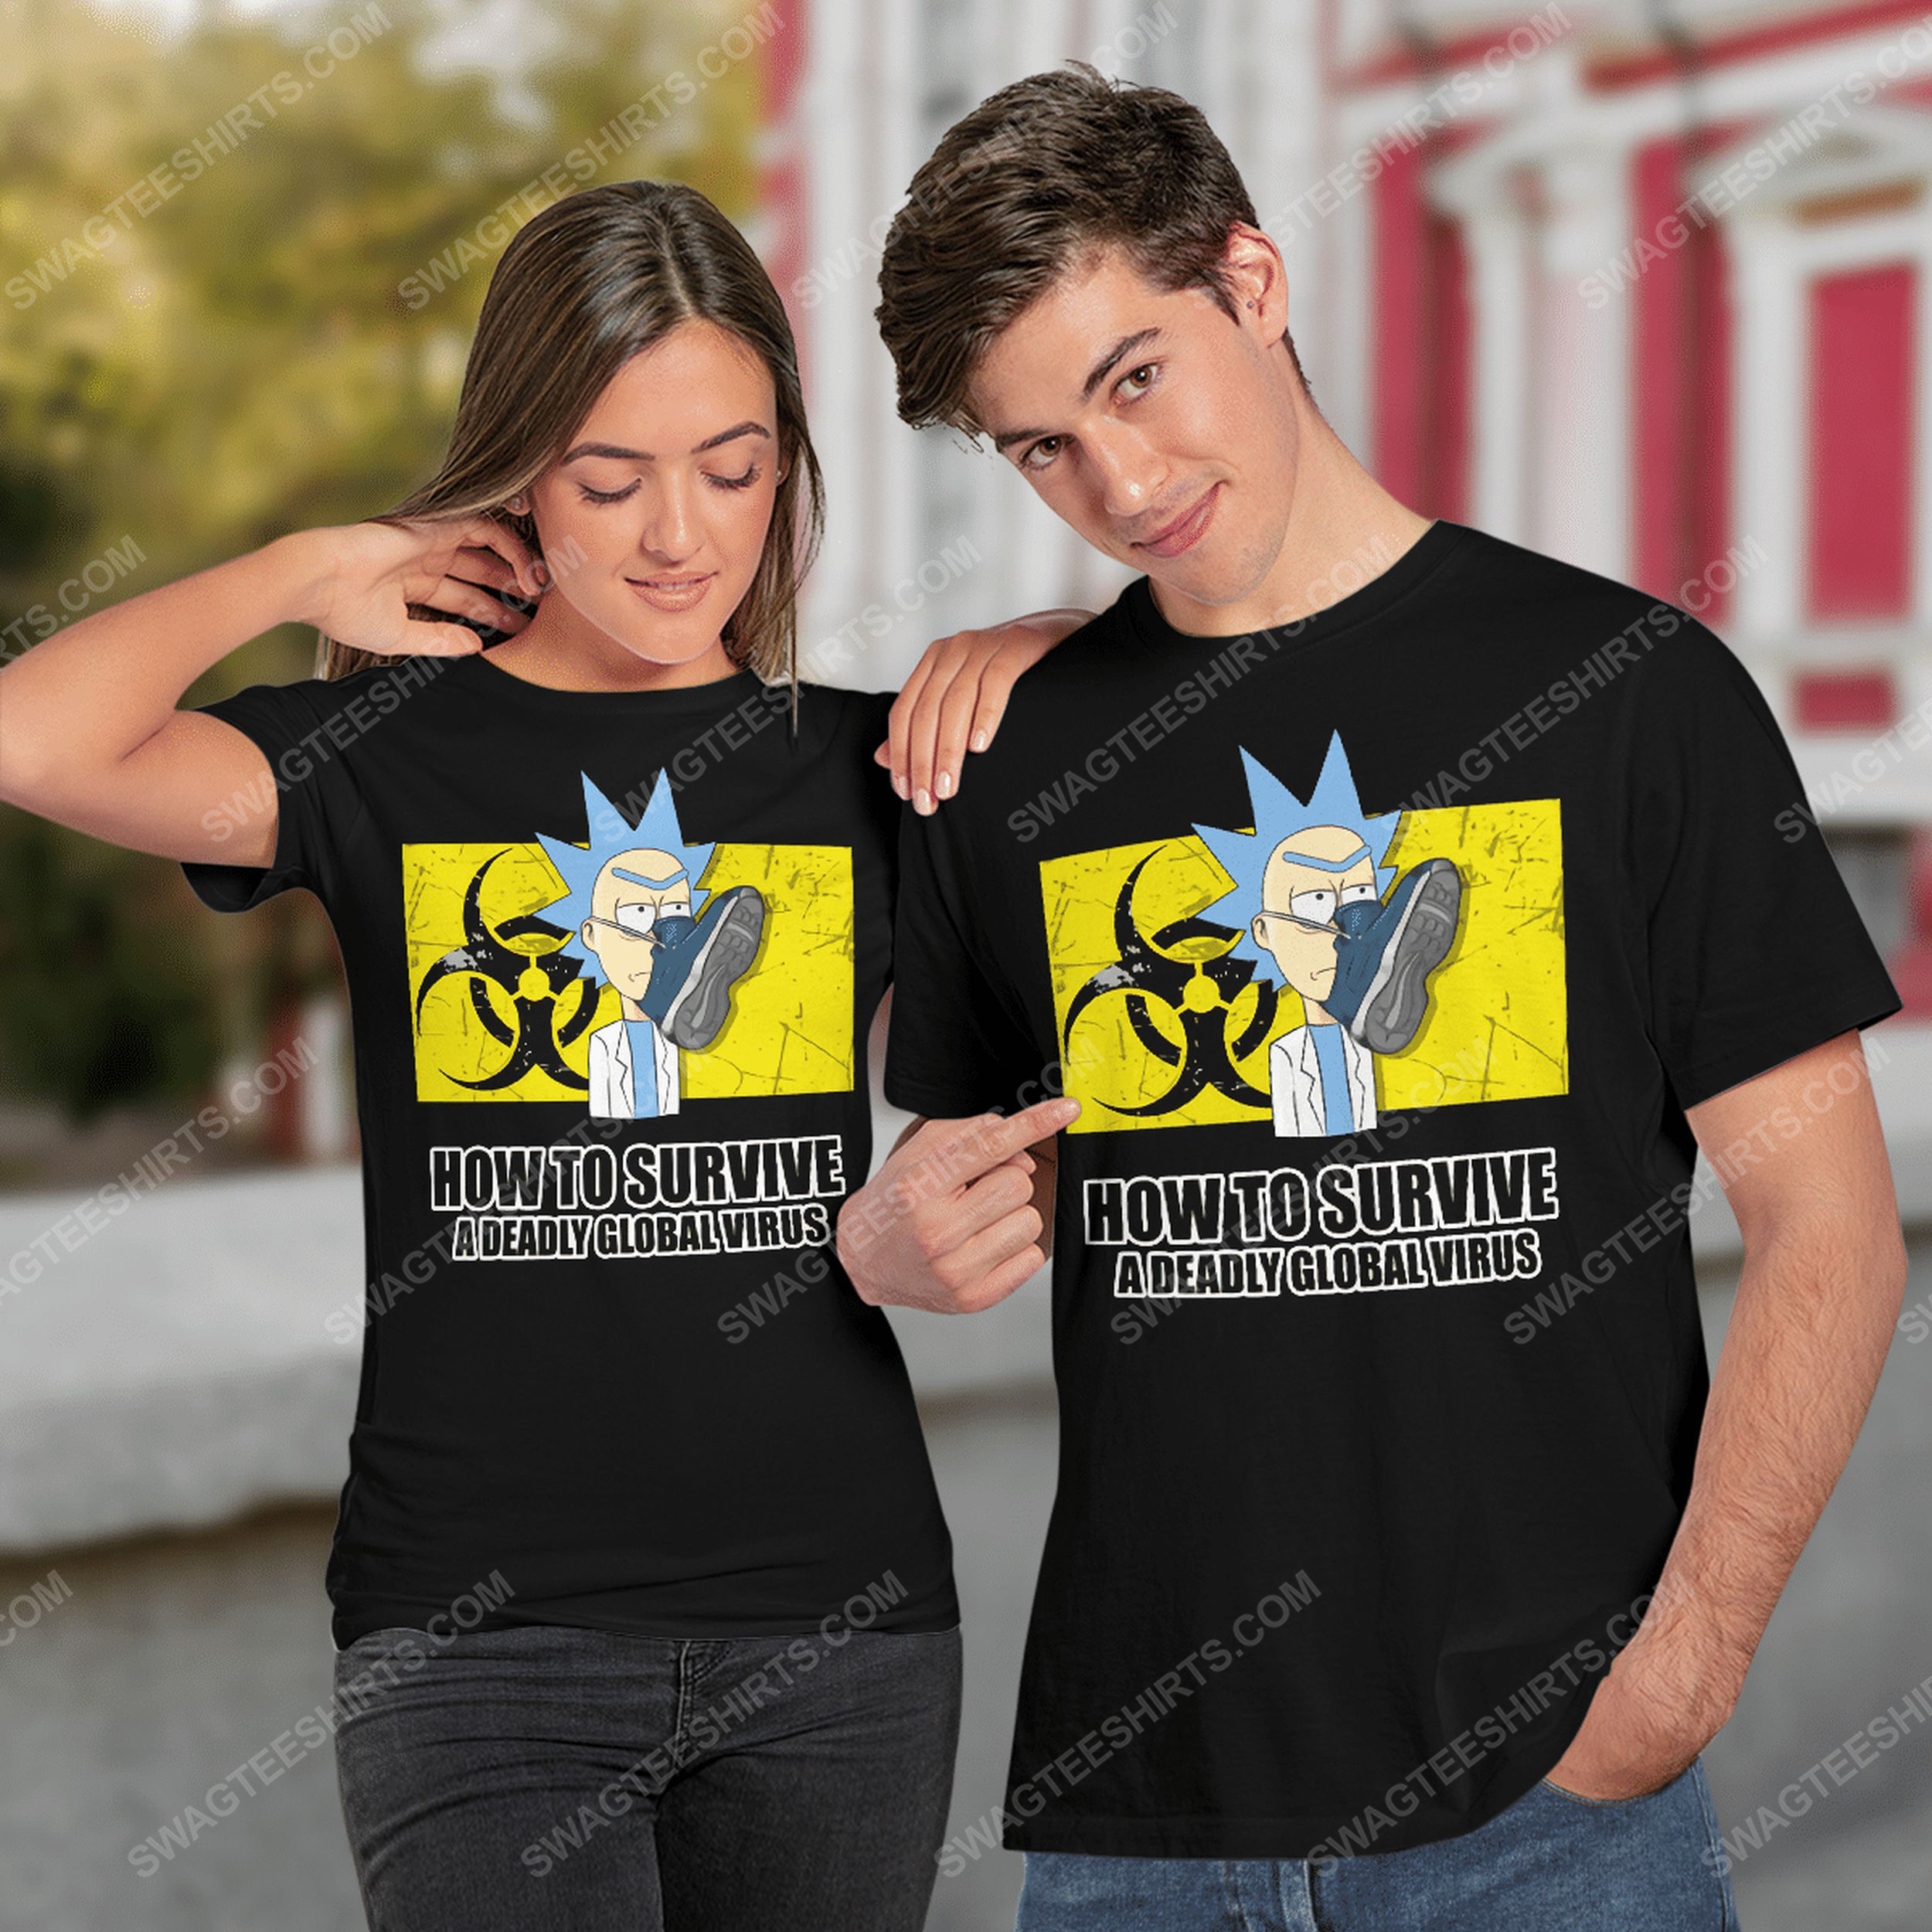 Rick and morty tv show how to survive a deadly global virus tshirt(1)